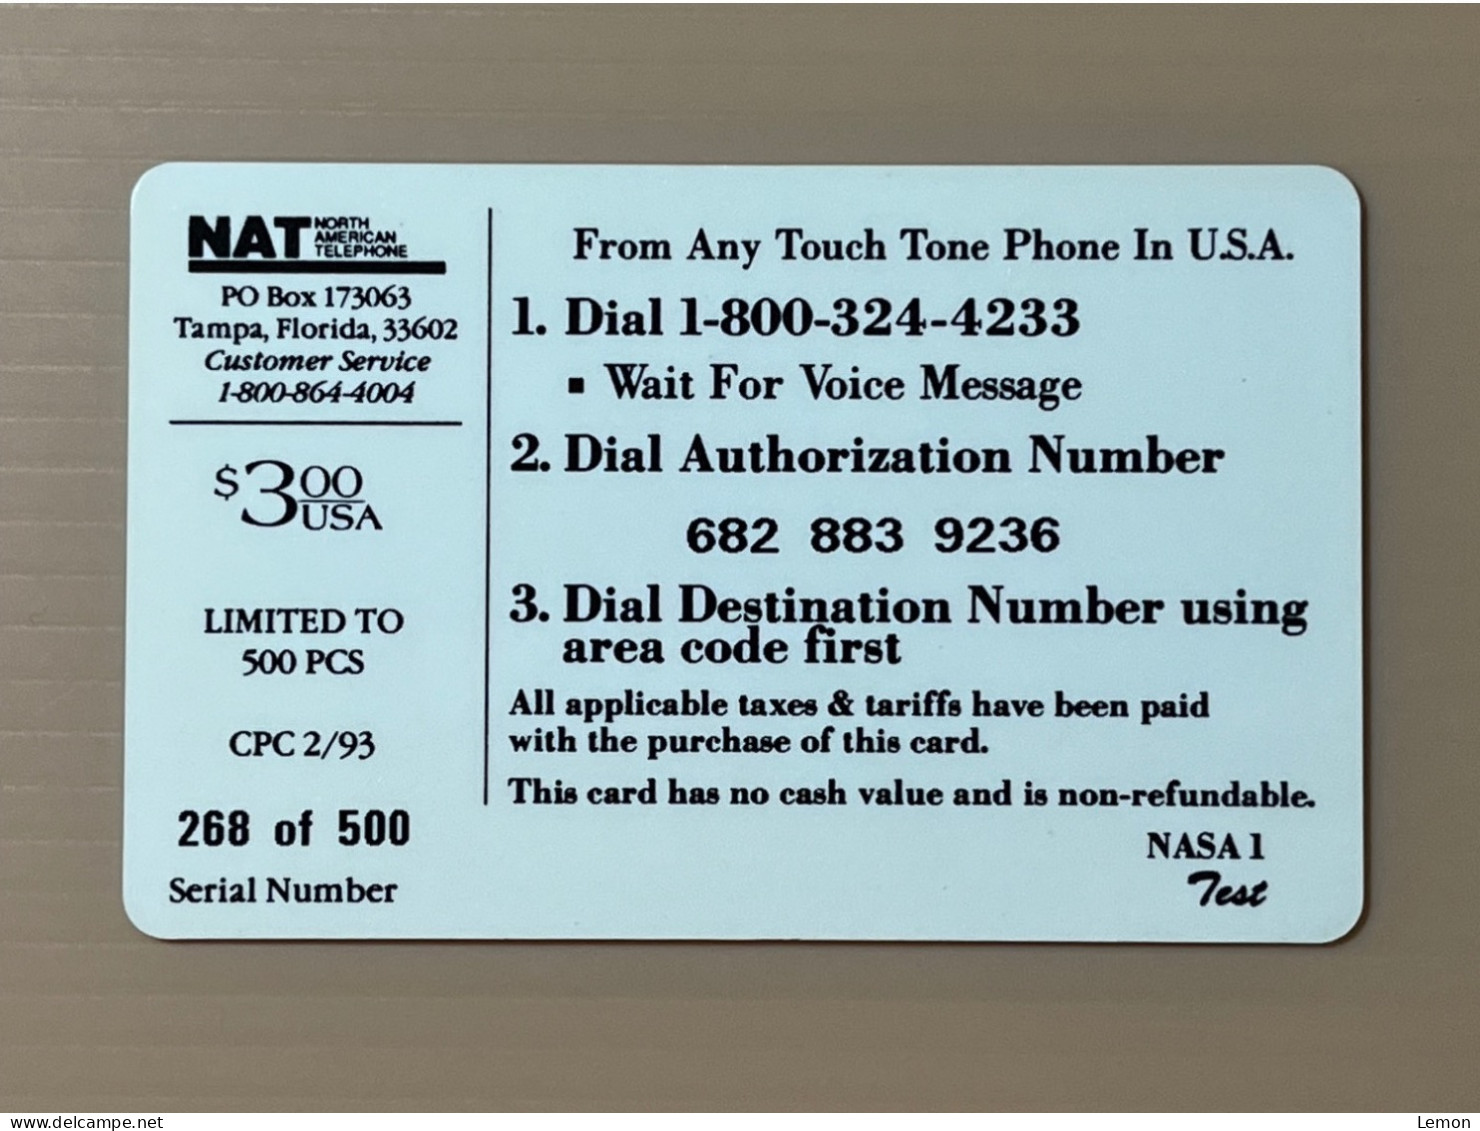 Mint USA UNITED STATES America Prepaid Telecard Phonecard, First Flight OV-105 STS-49 NASA (500EX), Set Of 1 Mint Card - Collections